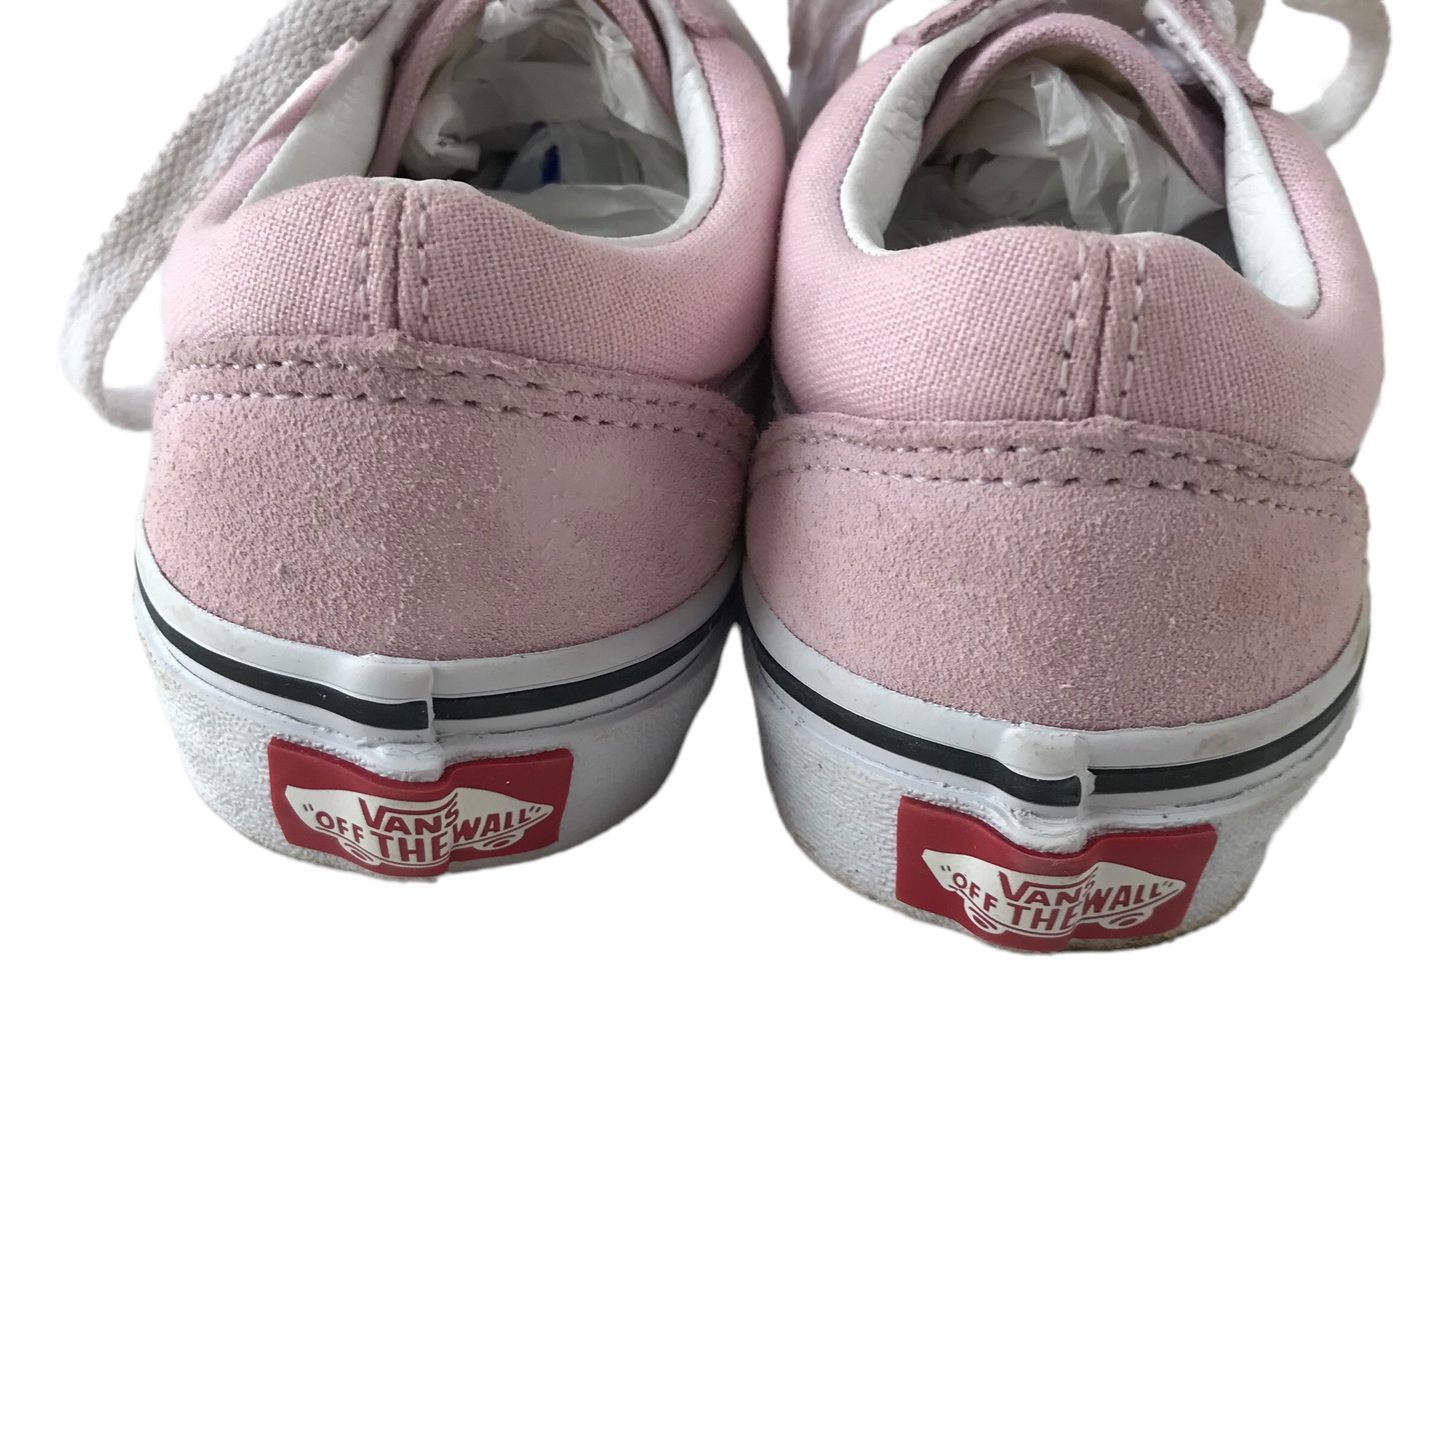 Vans Light Pink Leather Trainers Size UK 11.5 junior